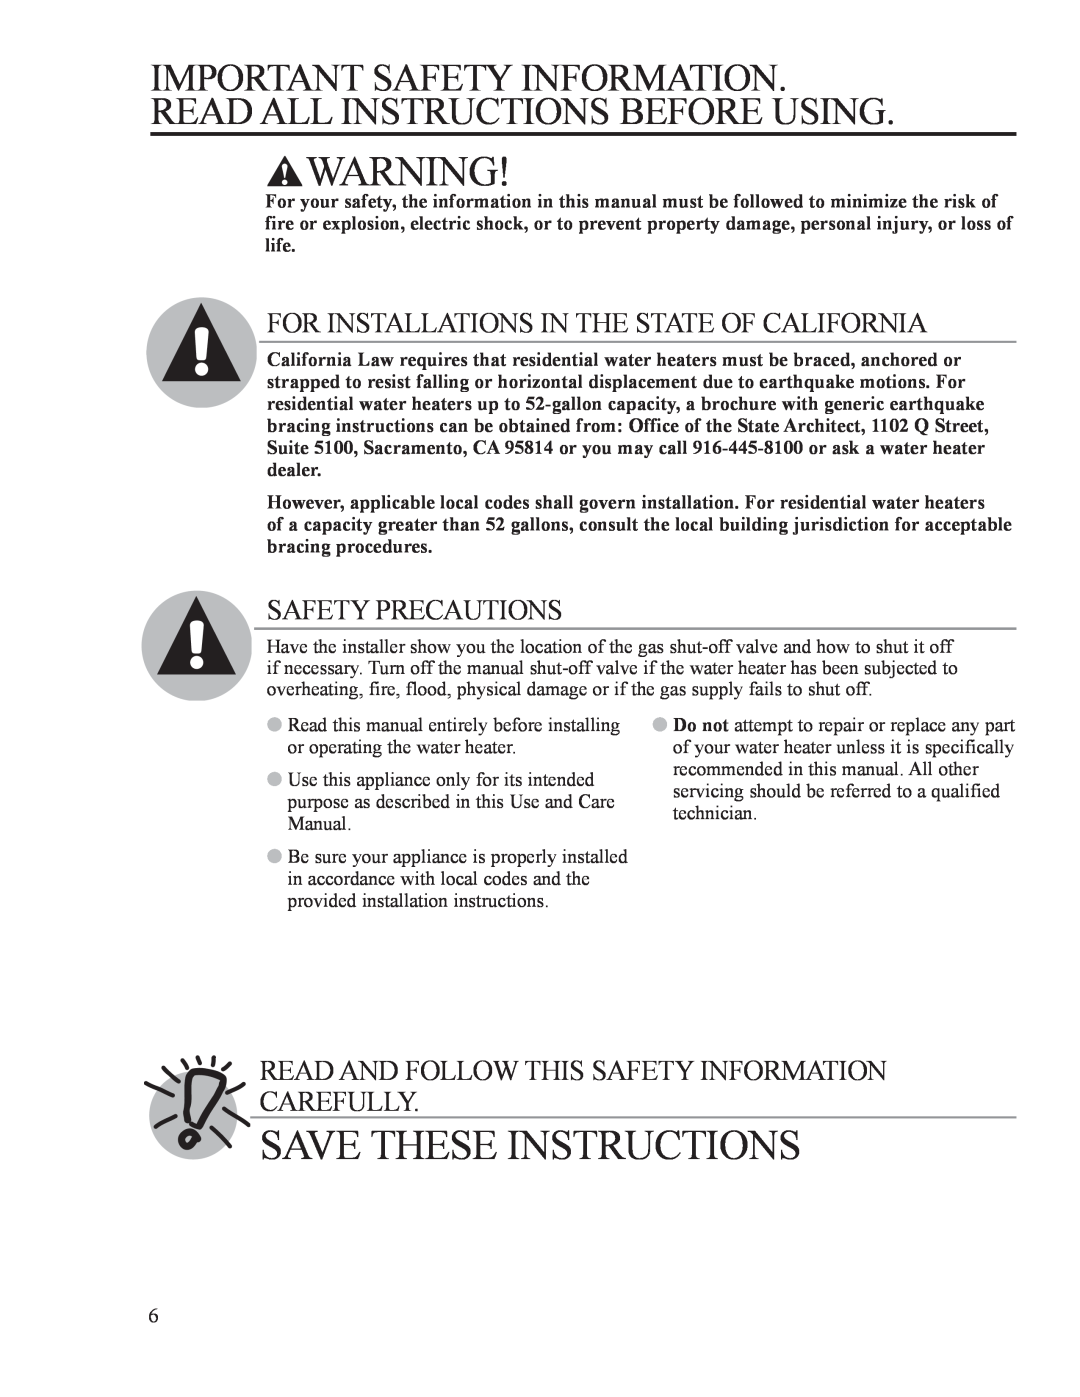 Ruud AP14236 Save These Instructions, For Installations In The State Of California, Safety Precautions 